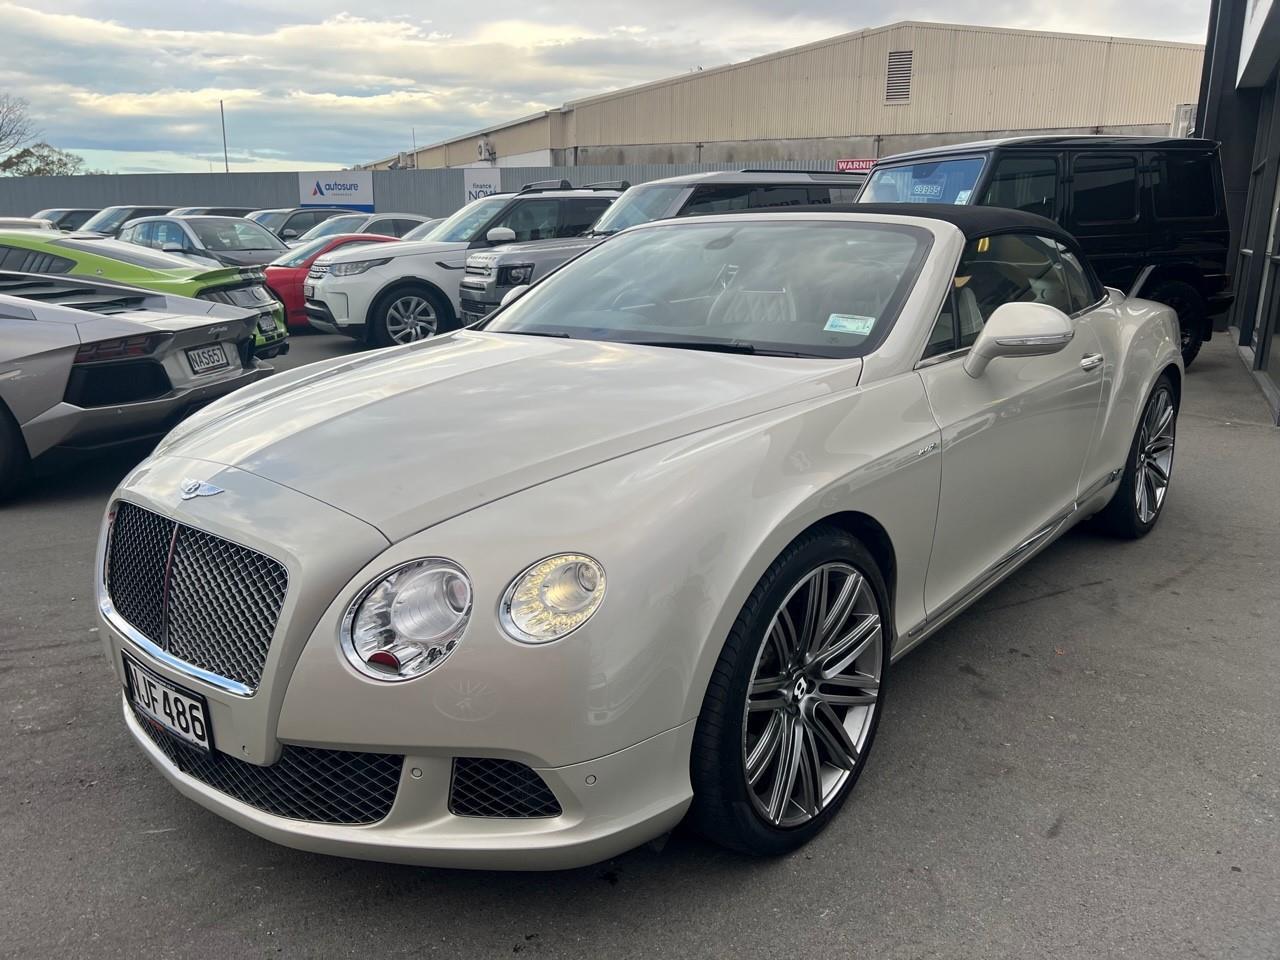 image-13, 2014 Bentley Continental GTC Speed Facelift Mullin at Christchurch